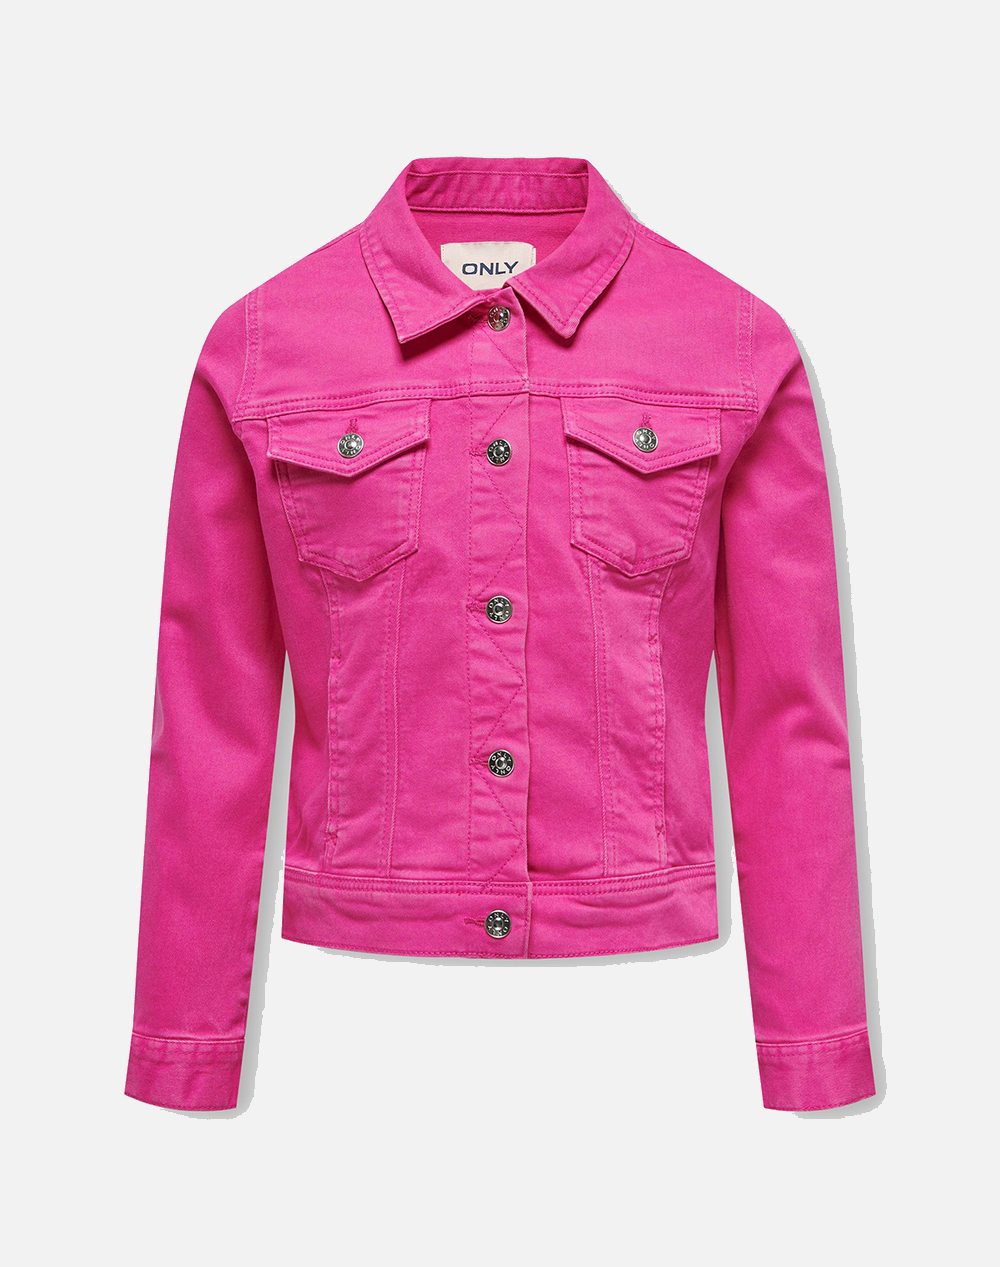 ONLY KOGAMAZING COLORED JACKET PNT 15246120-Raspberry Rose Fuchsia 3830AONLY3120011_XR22192